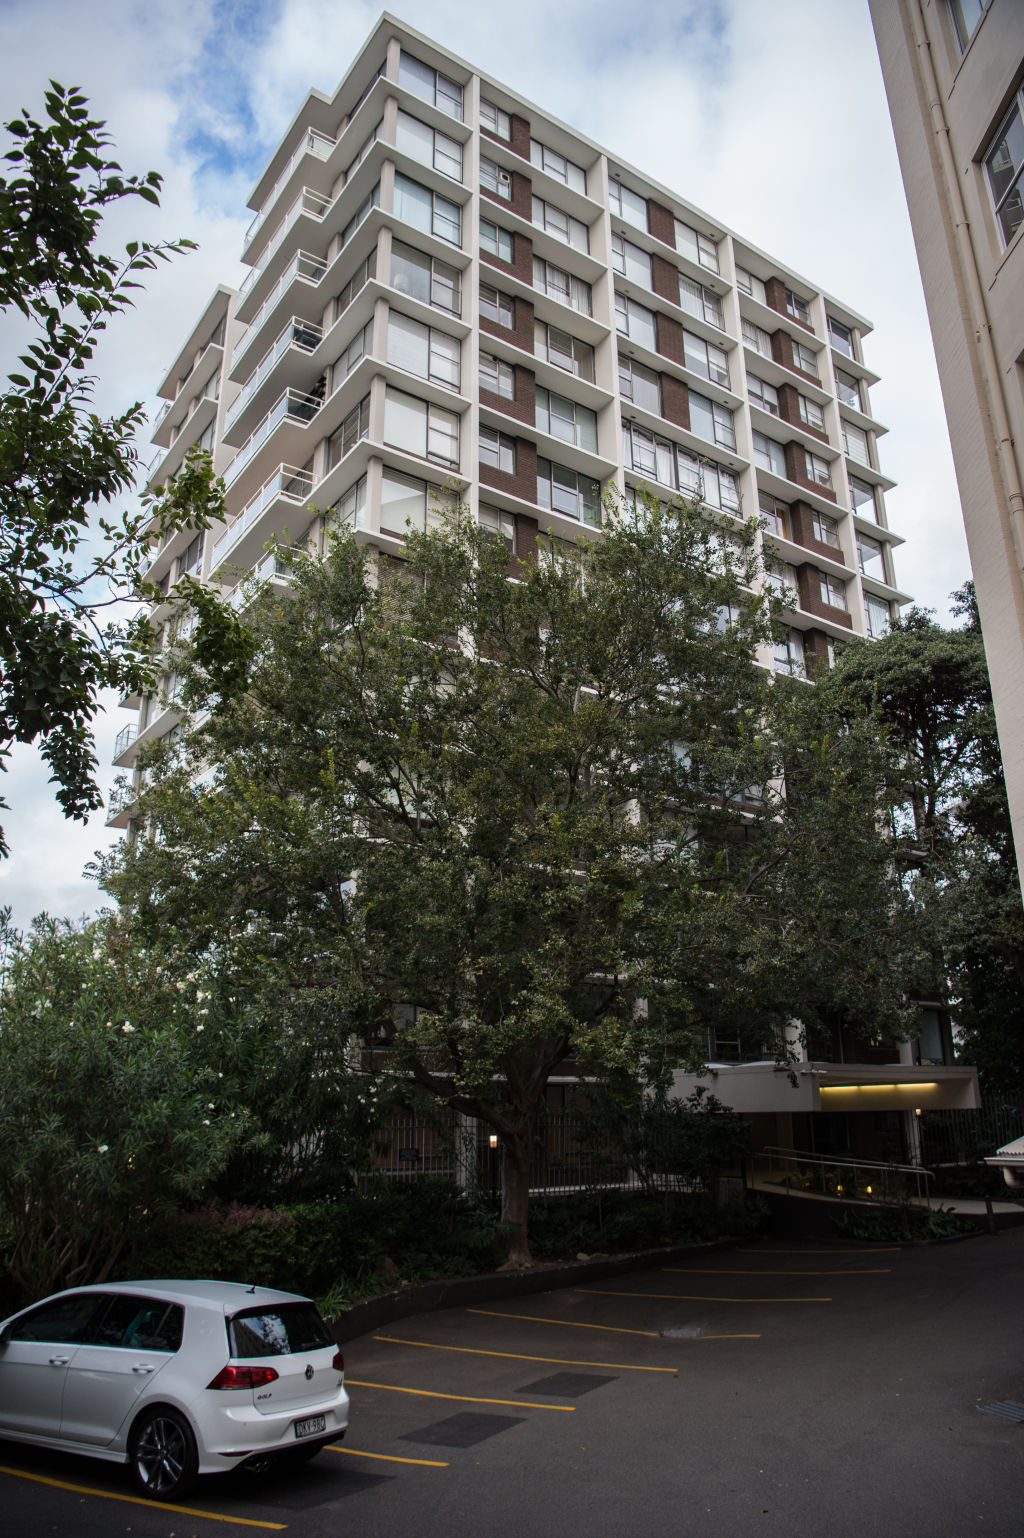 The Elizabeth Bay Gardens apartment tower. Photo: Wolter Peeters